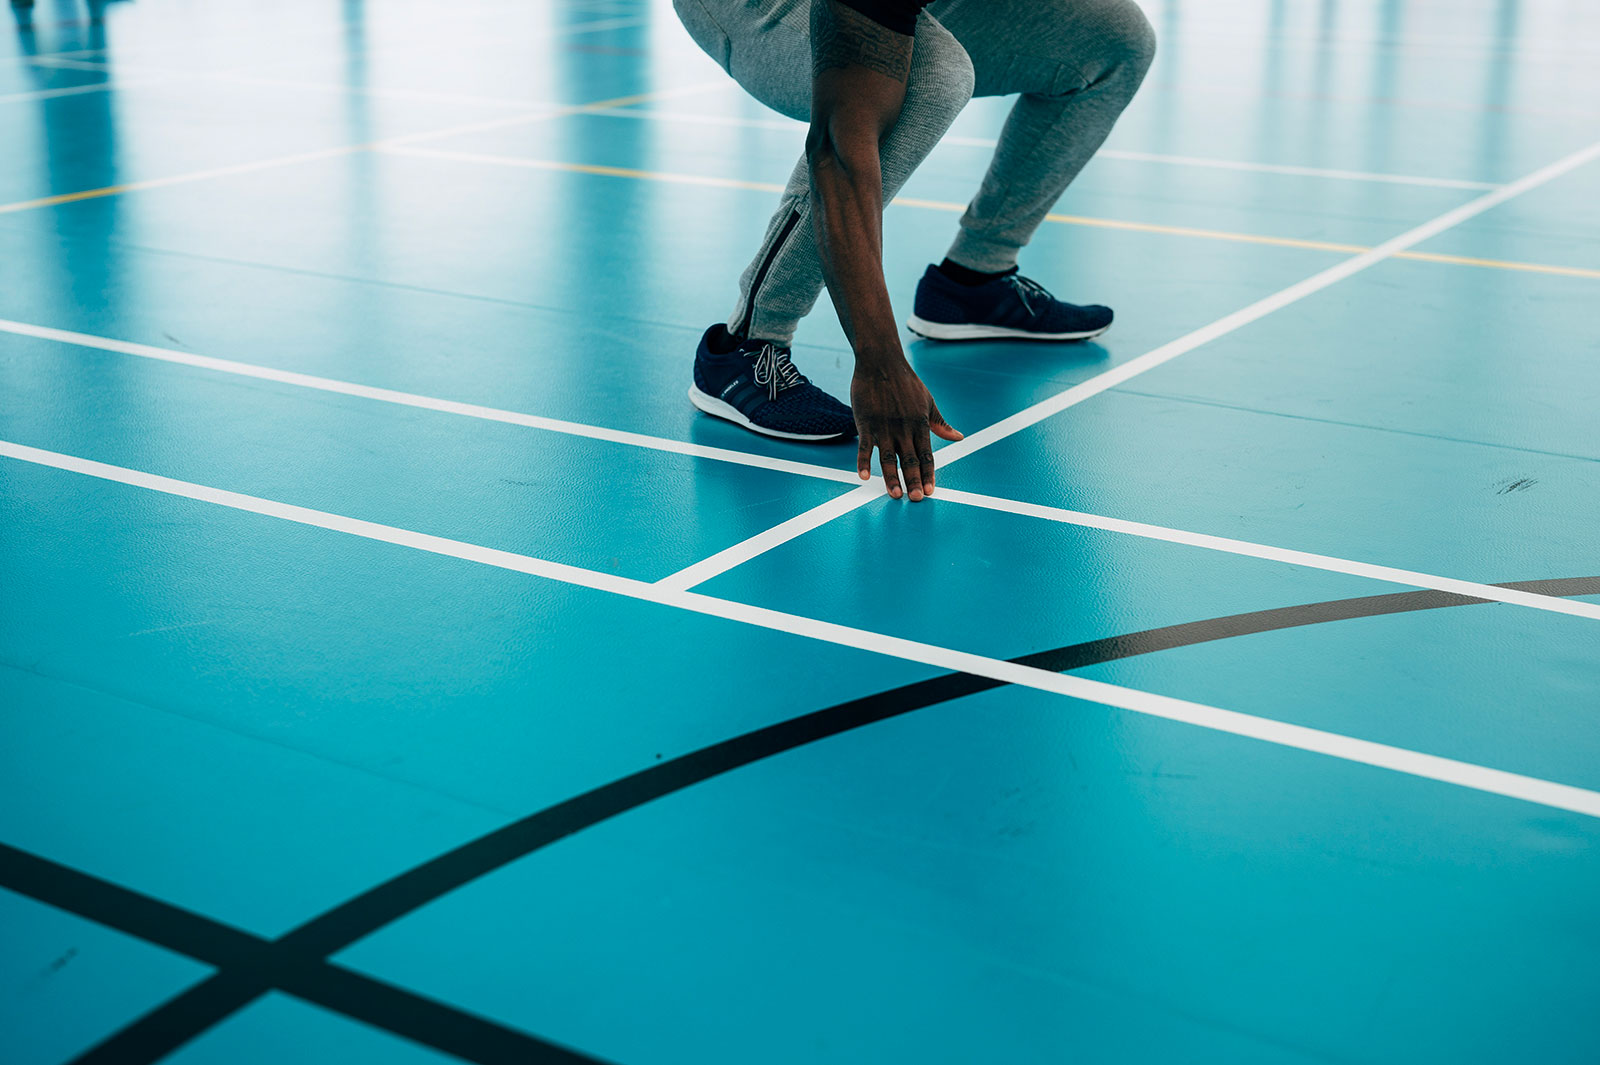 Person next to lines in indoor sports pitch